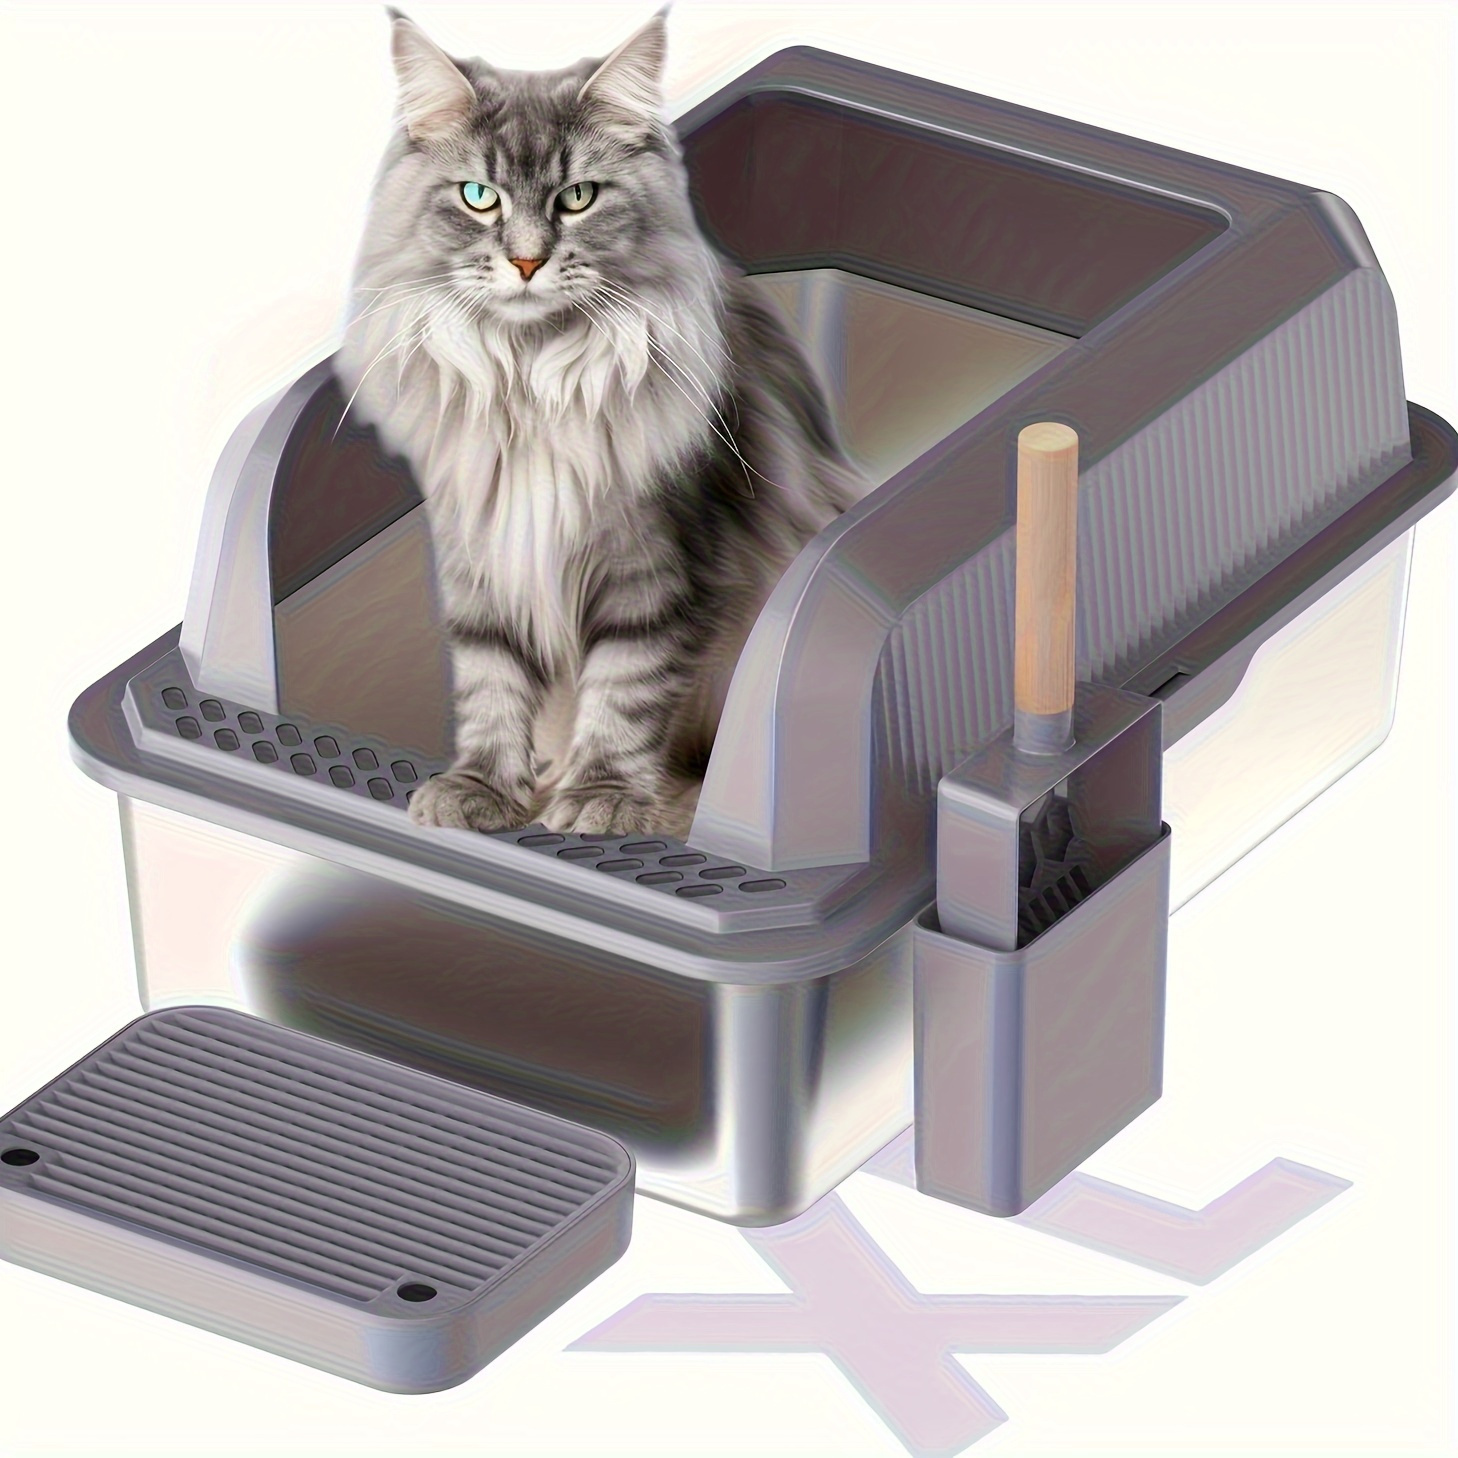 

Extra-large Stainless Steel Cat Litter Box With Lid - Open-top, High-sided, Leak-proof, Easy To Clean, Includes Scoop - Durable Abs & Plastic Construction, Odor-free Design With Separate Base